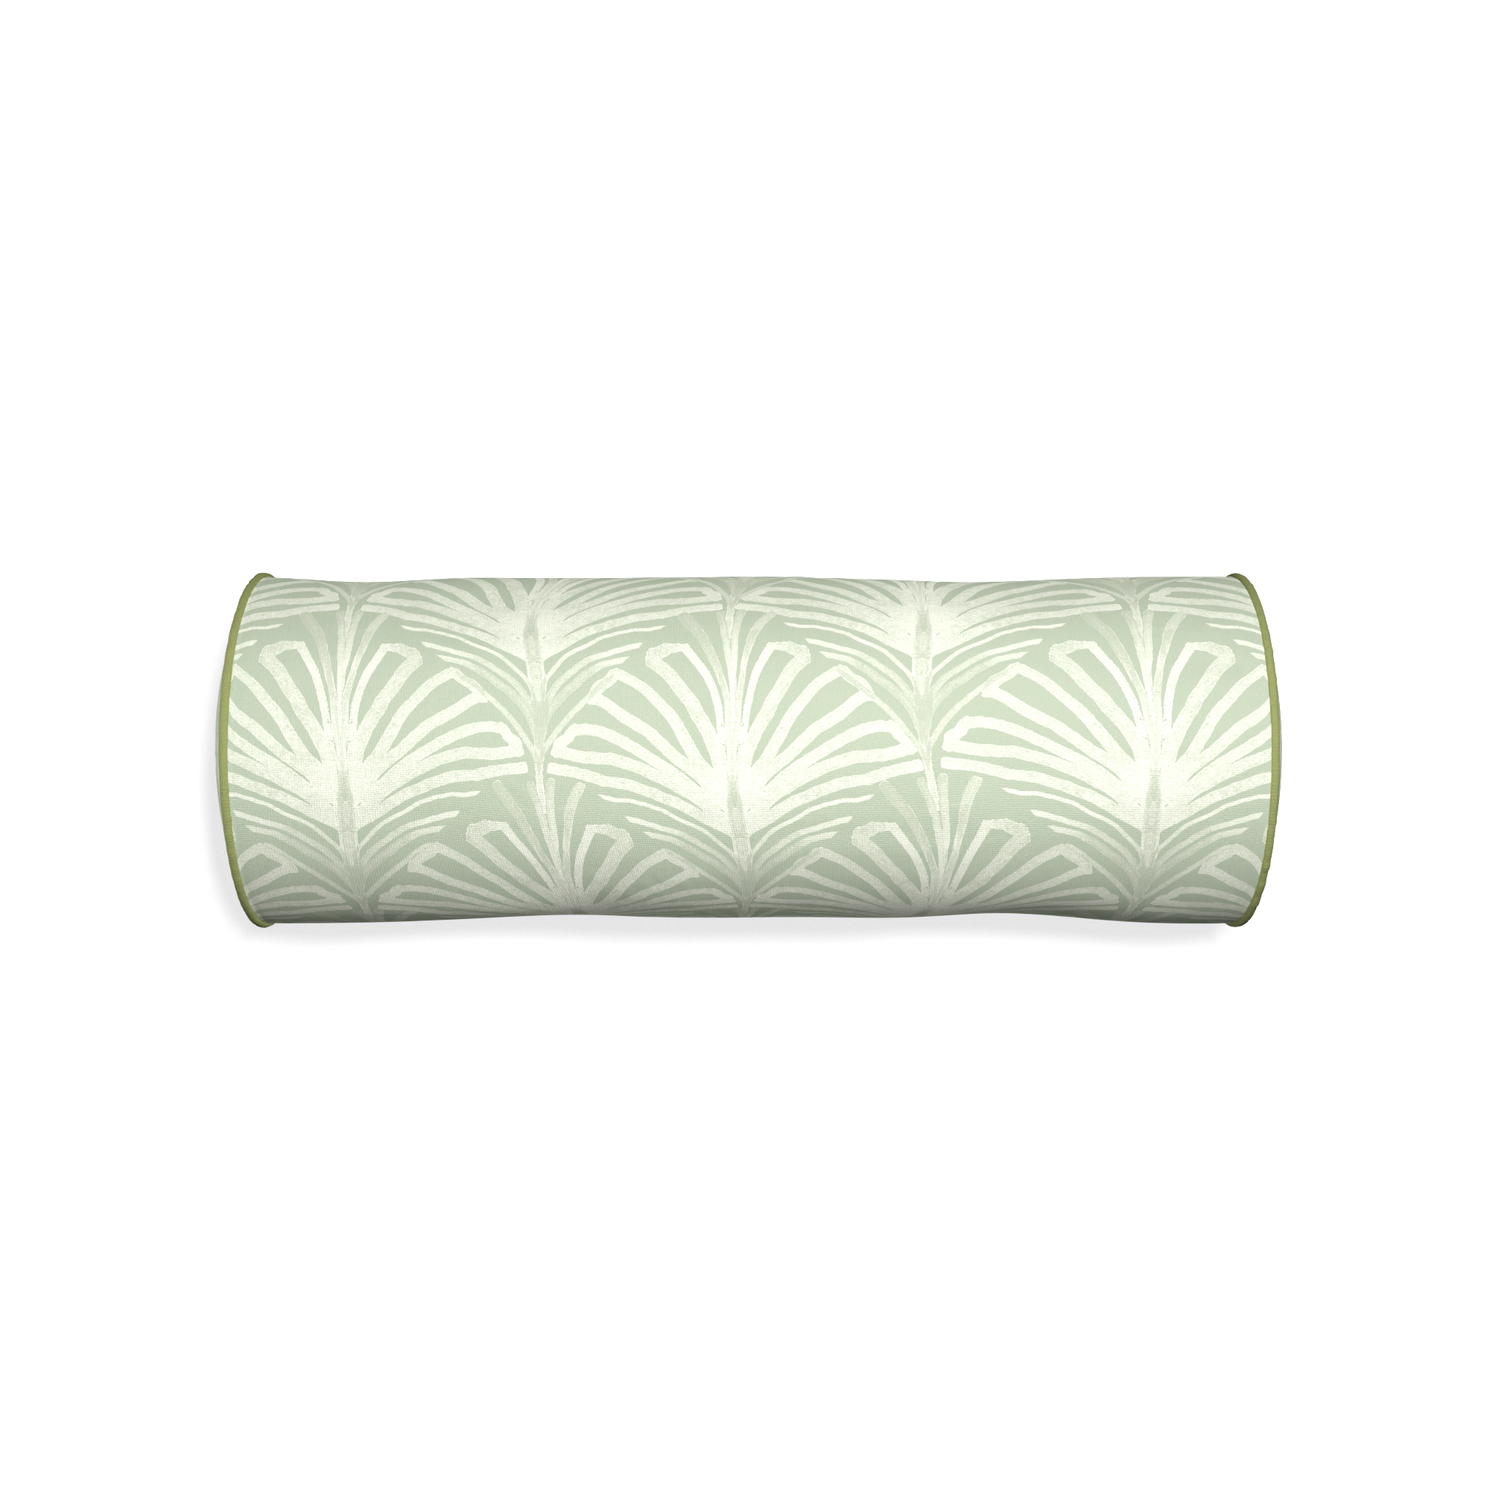 Bolster suzy sage custom pillow with moss piping on white background